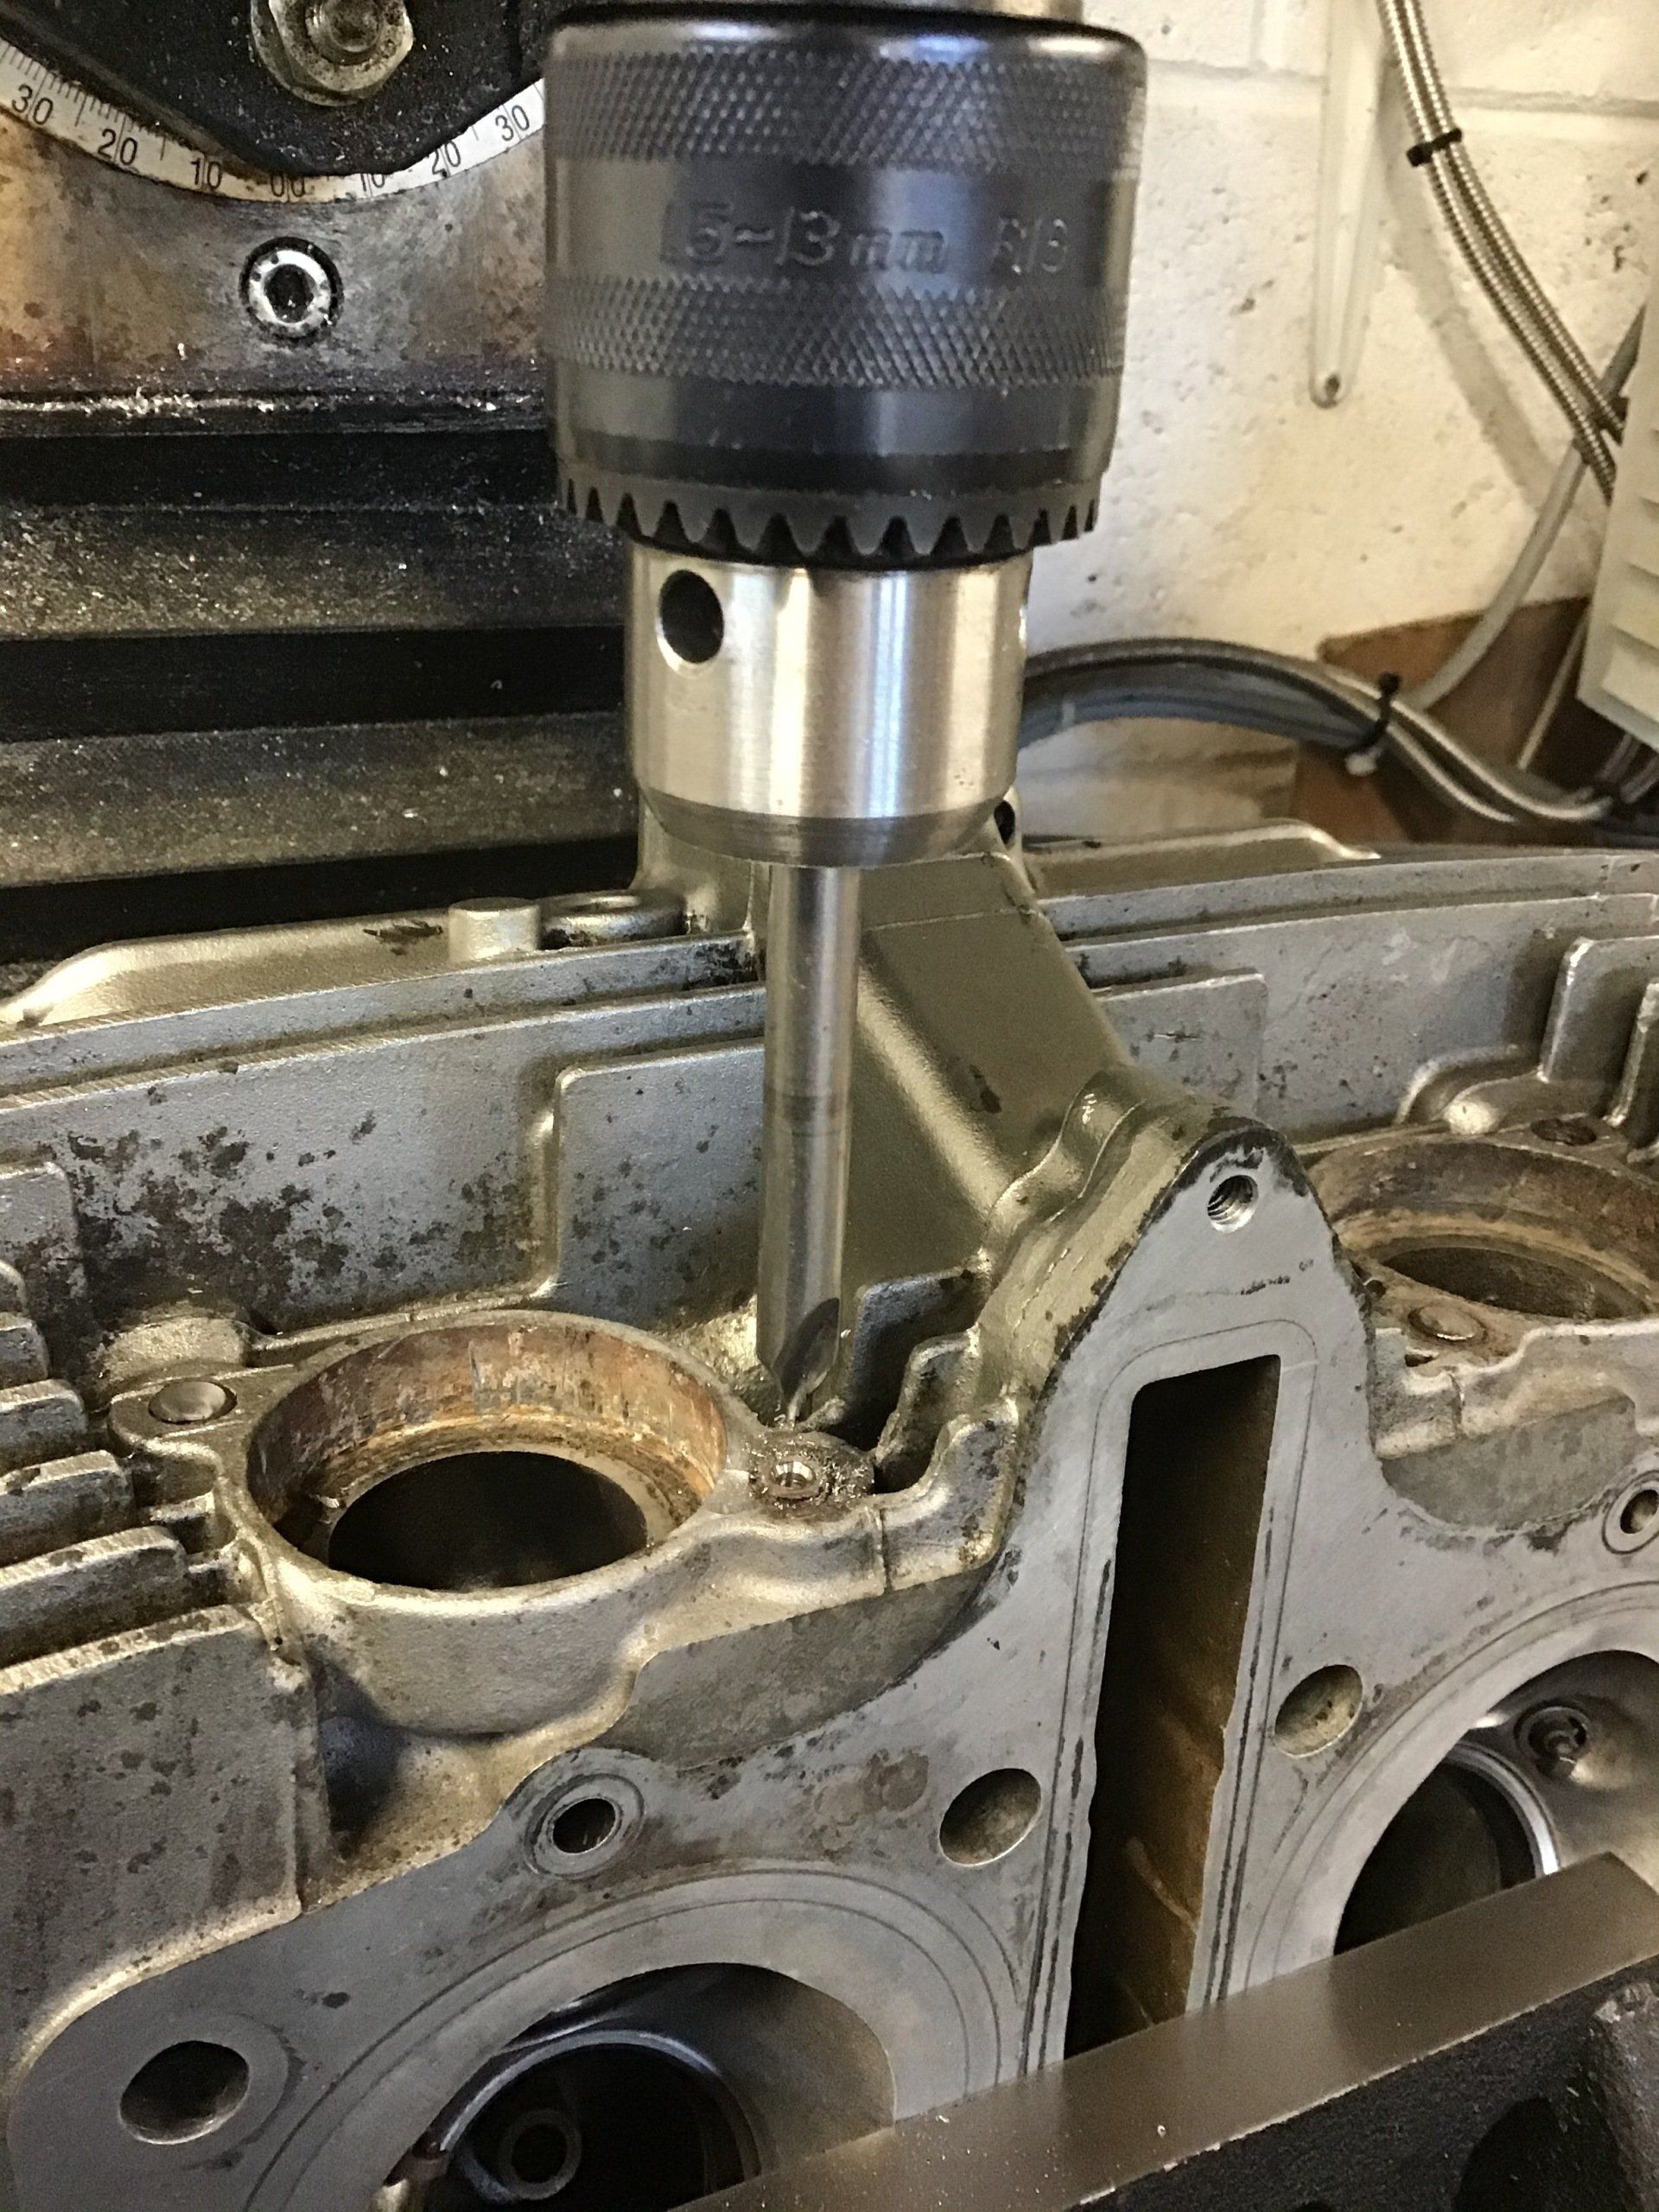 Drilling out GS500 exhaust studs